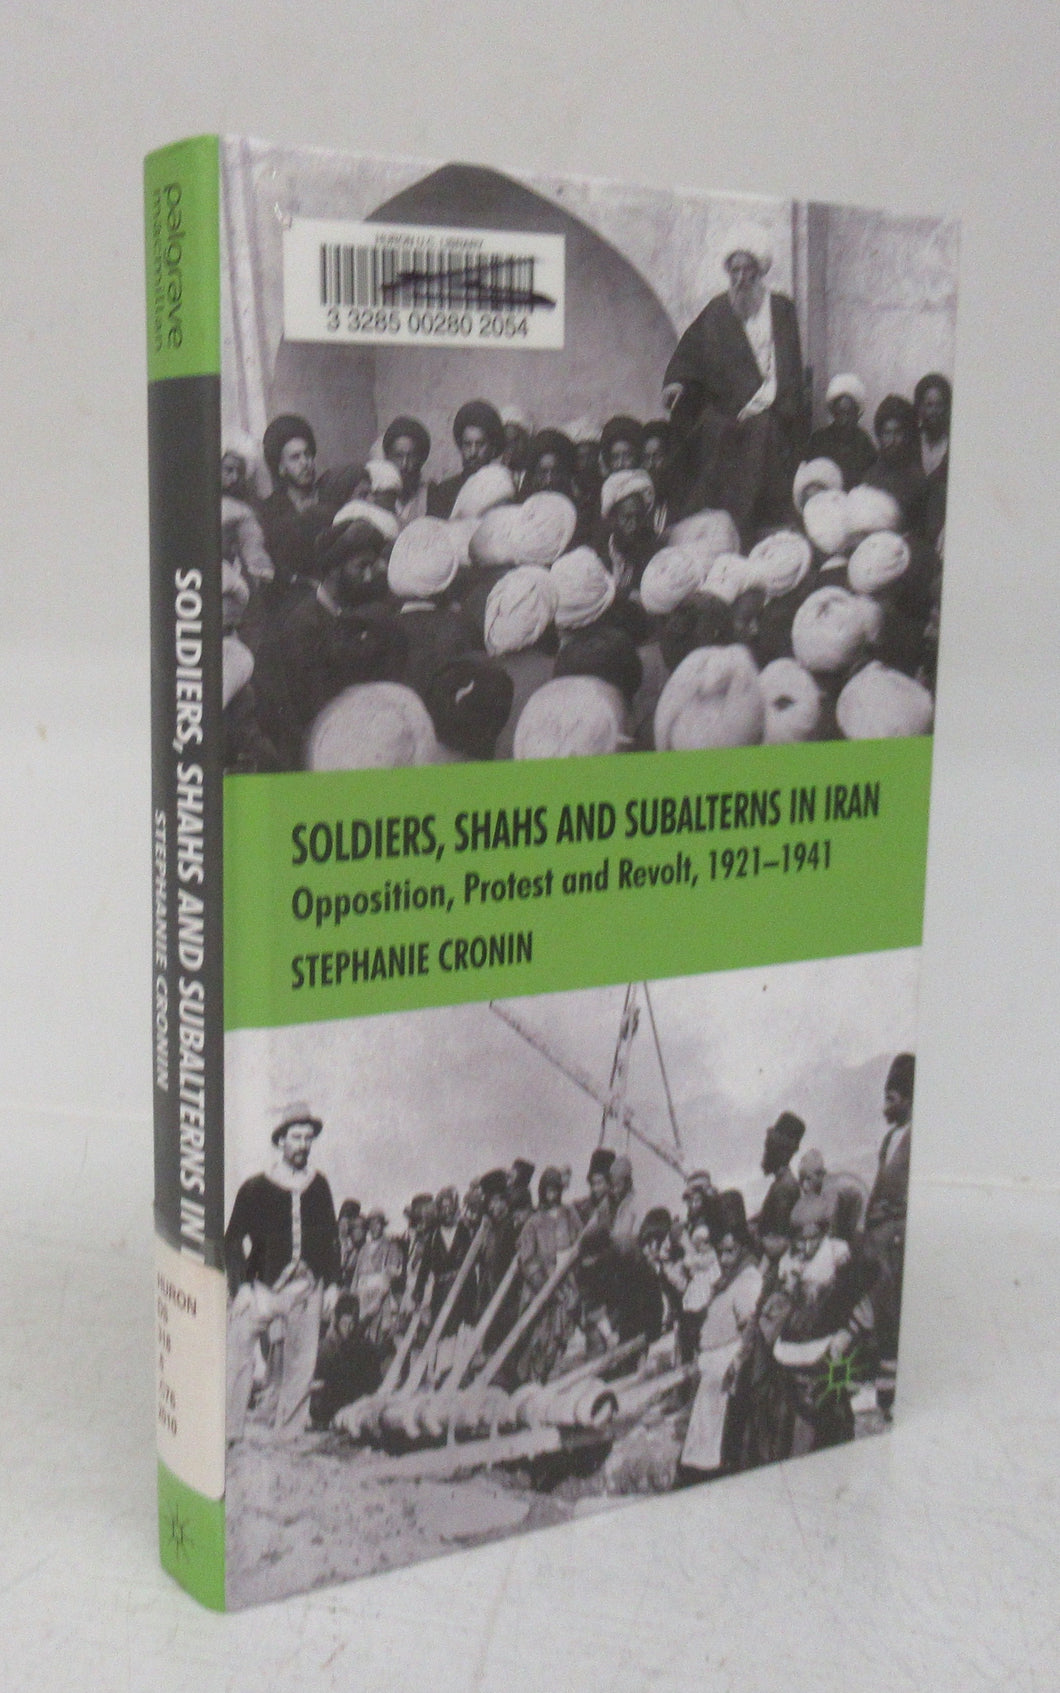 Soldiers, Shahs and Subalterns in Iran: Opposition, Protest and Revolt, 1921-1941